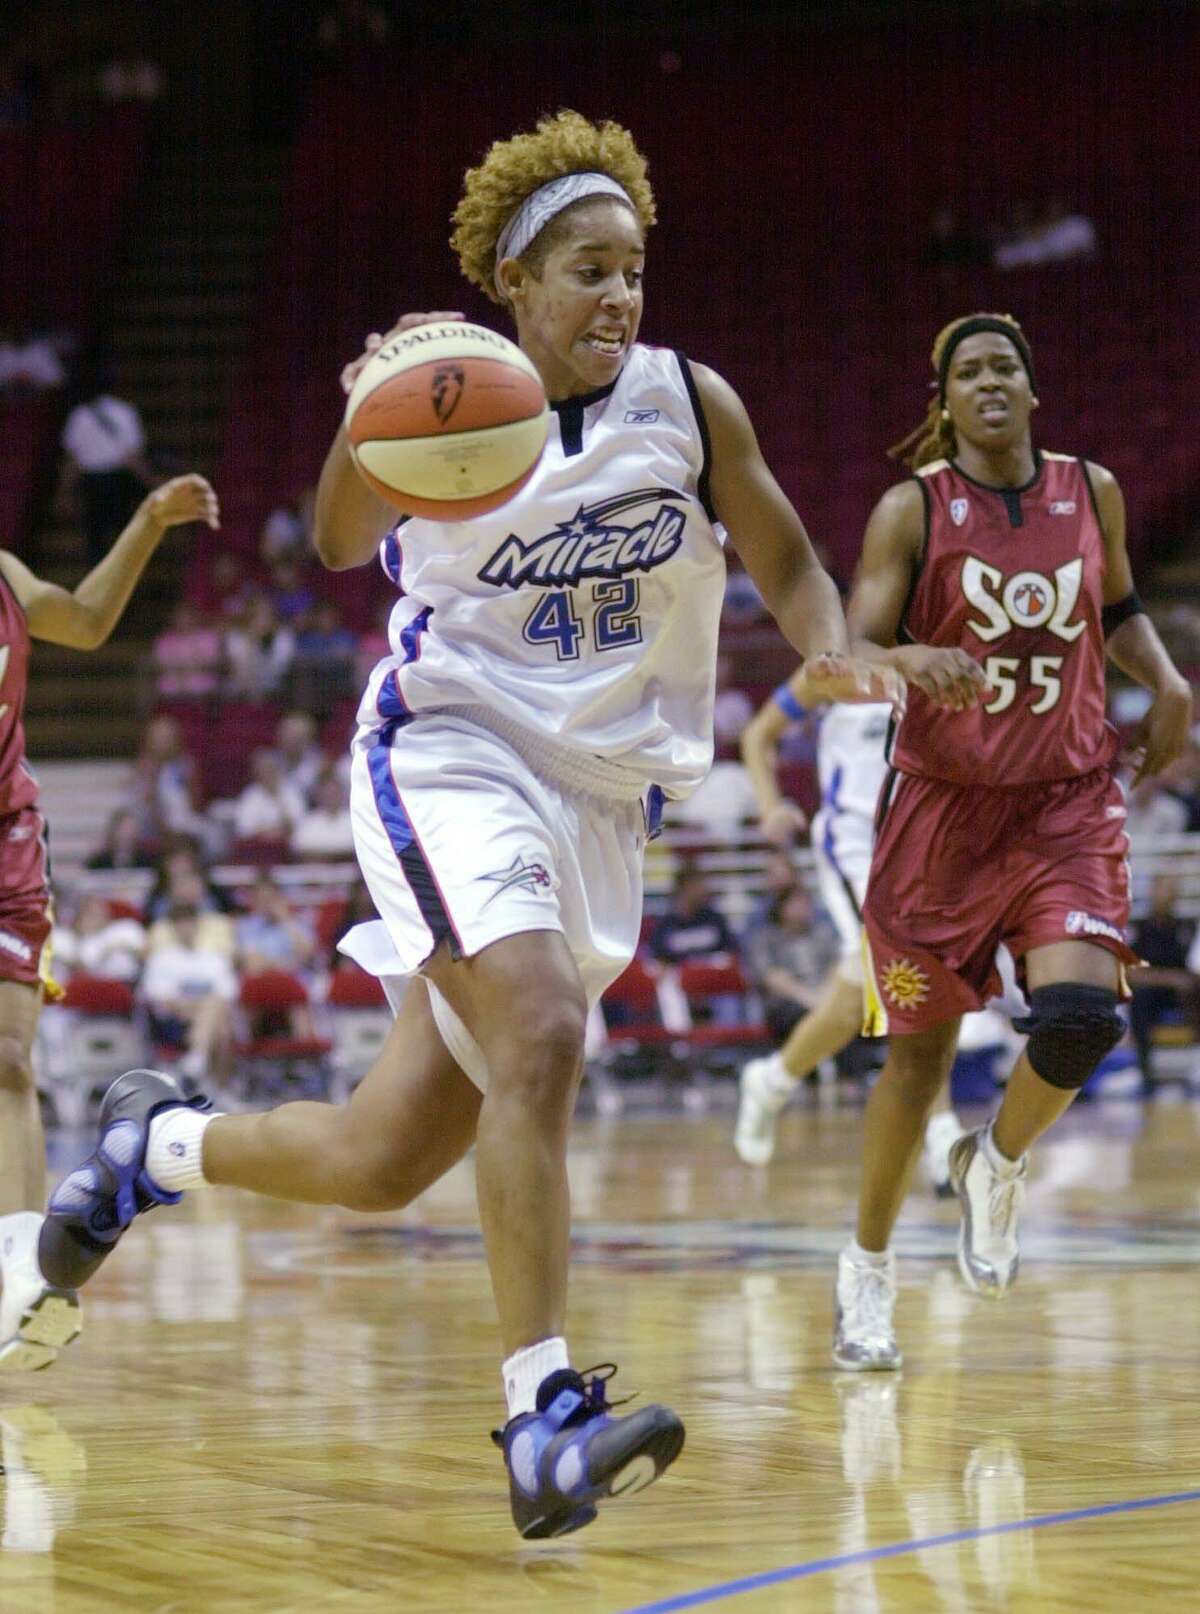 The Orlando Miracle's Nykesha Sales drives to the basket during a 2002 WNBA game.